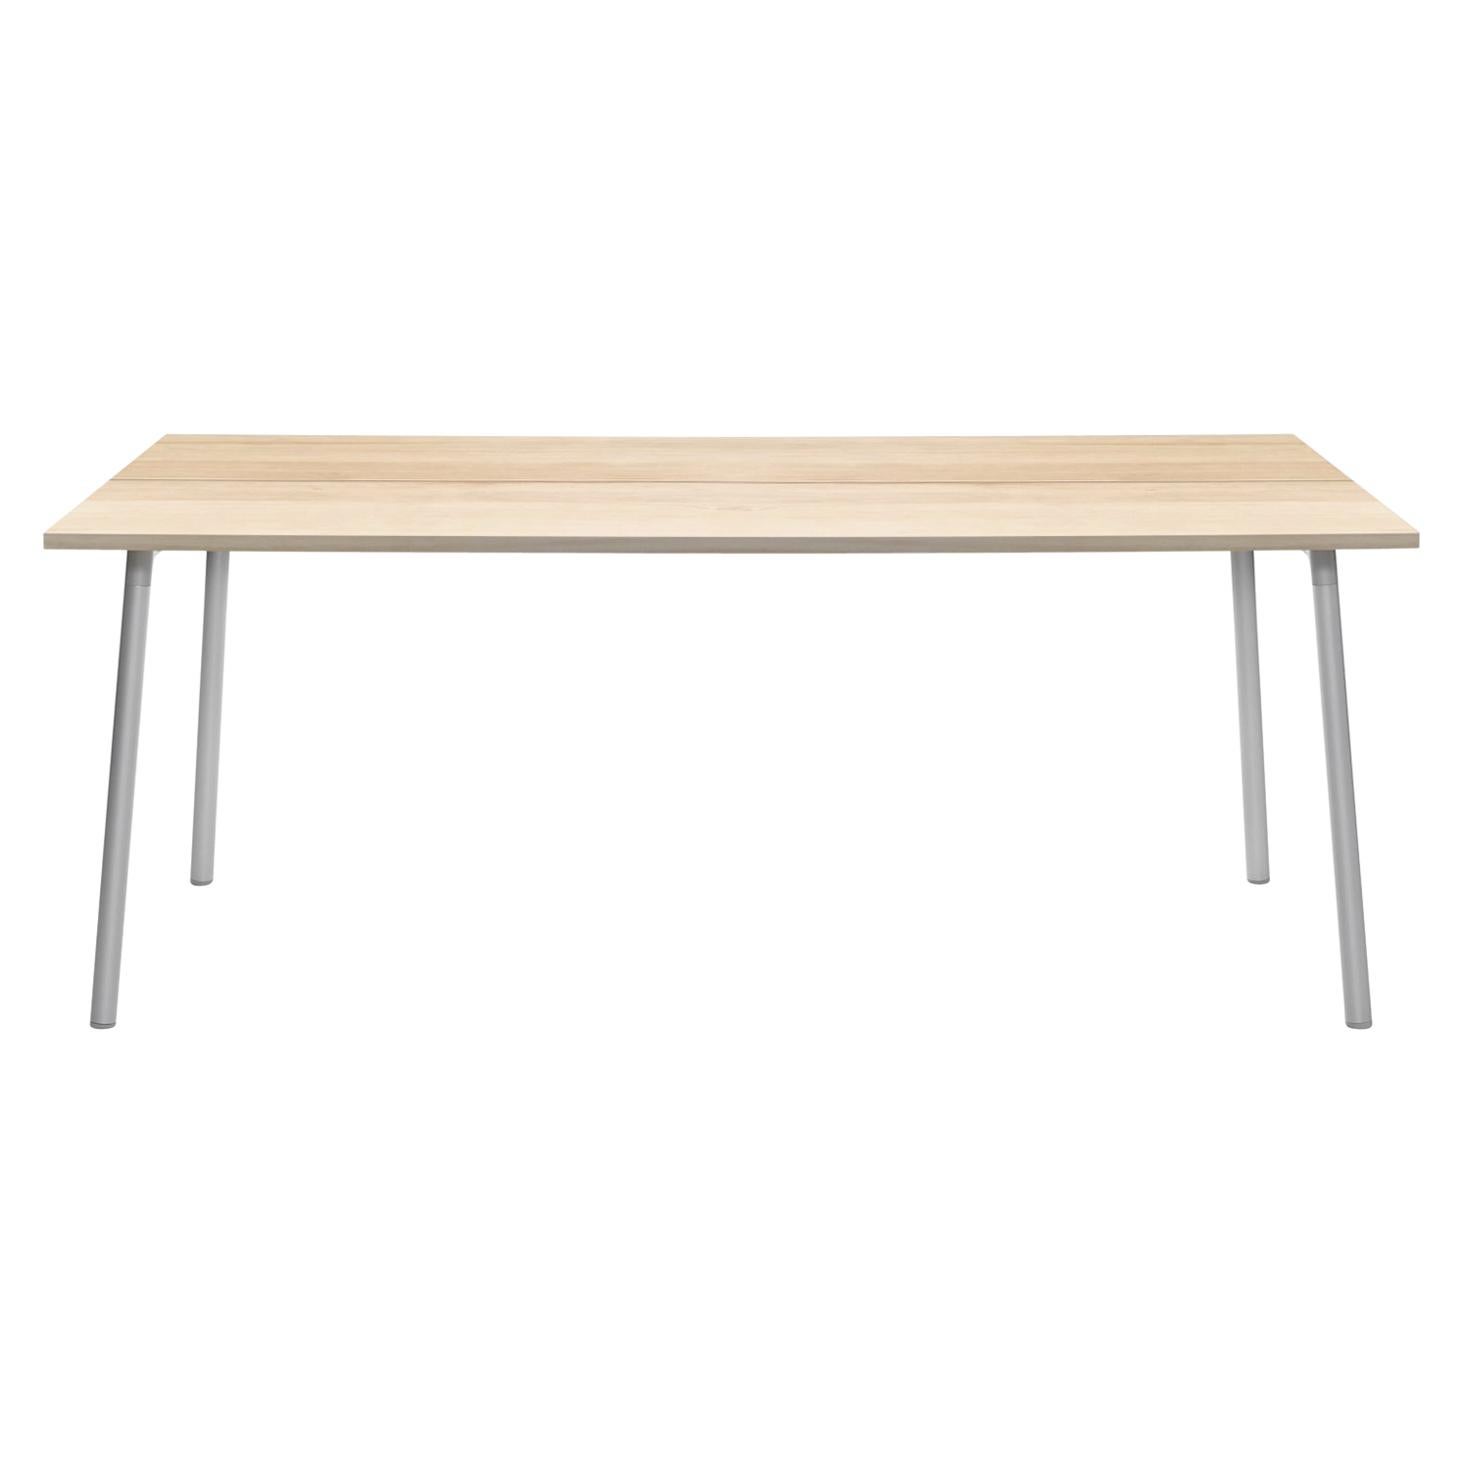 Emeco Run 72" Table with Aluminum Frame & Wood Top by Sam Hecht and Kim Colin For Sale